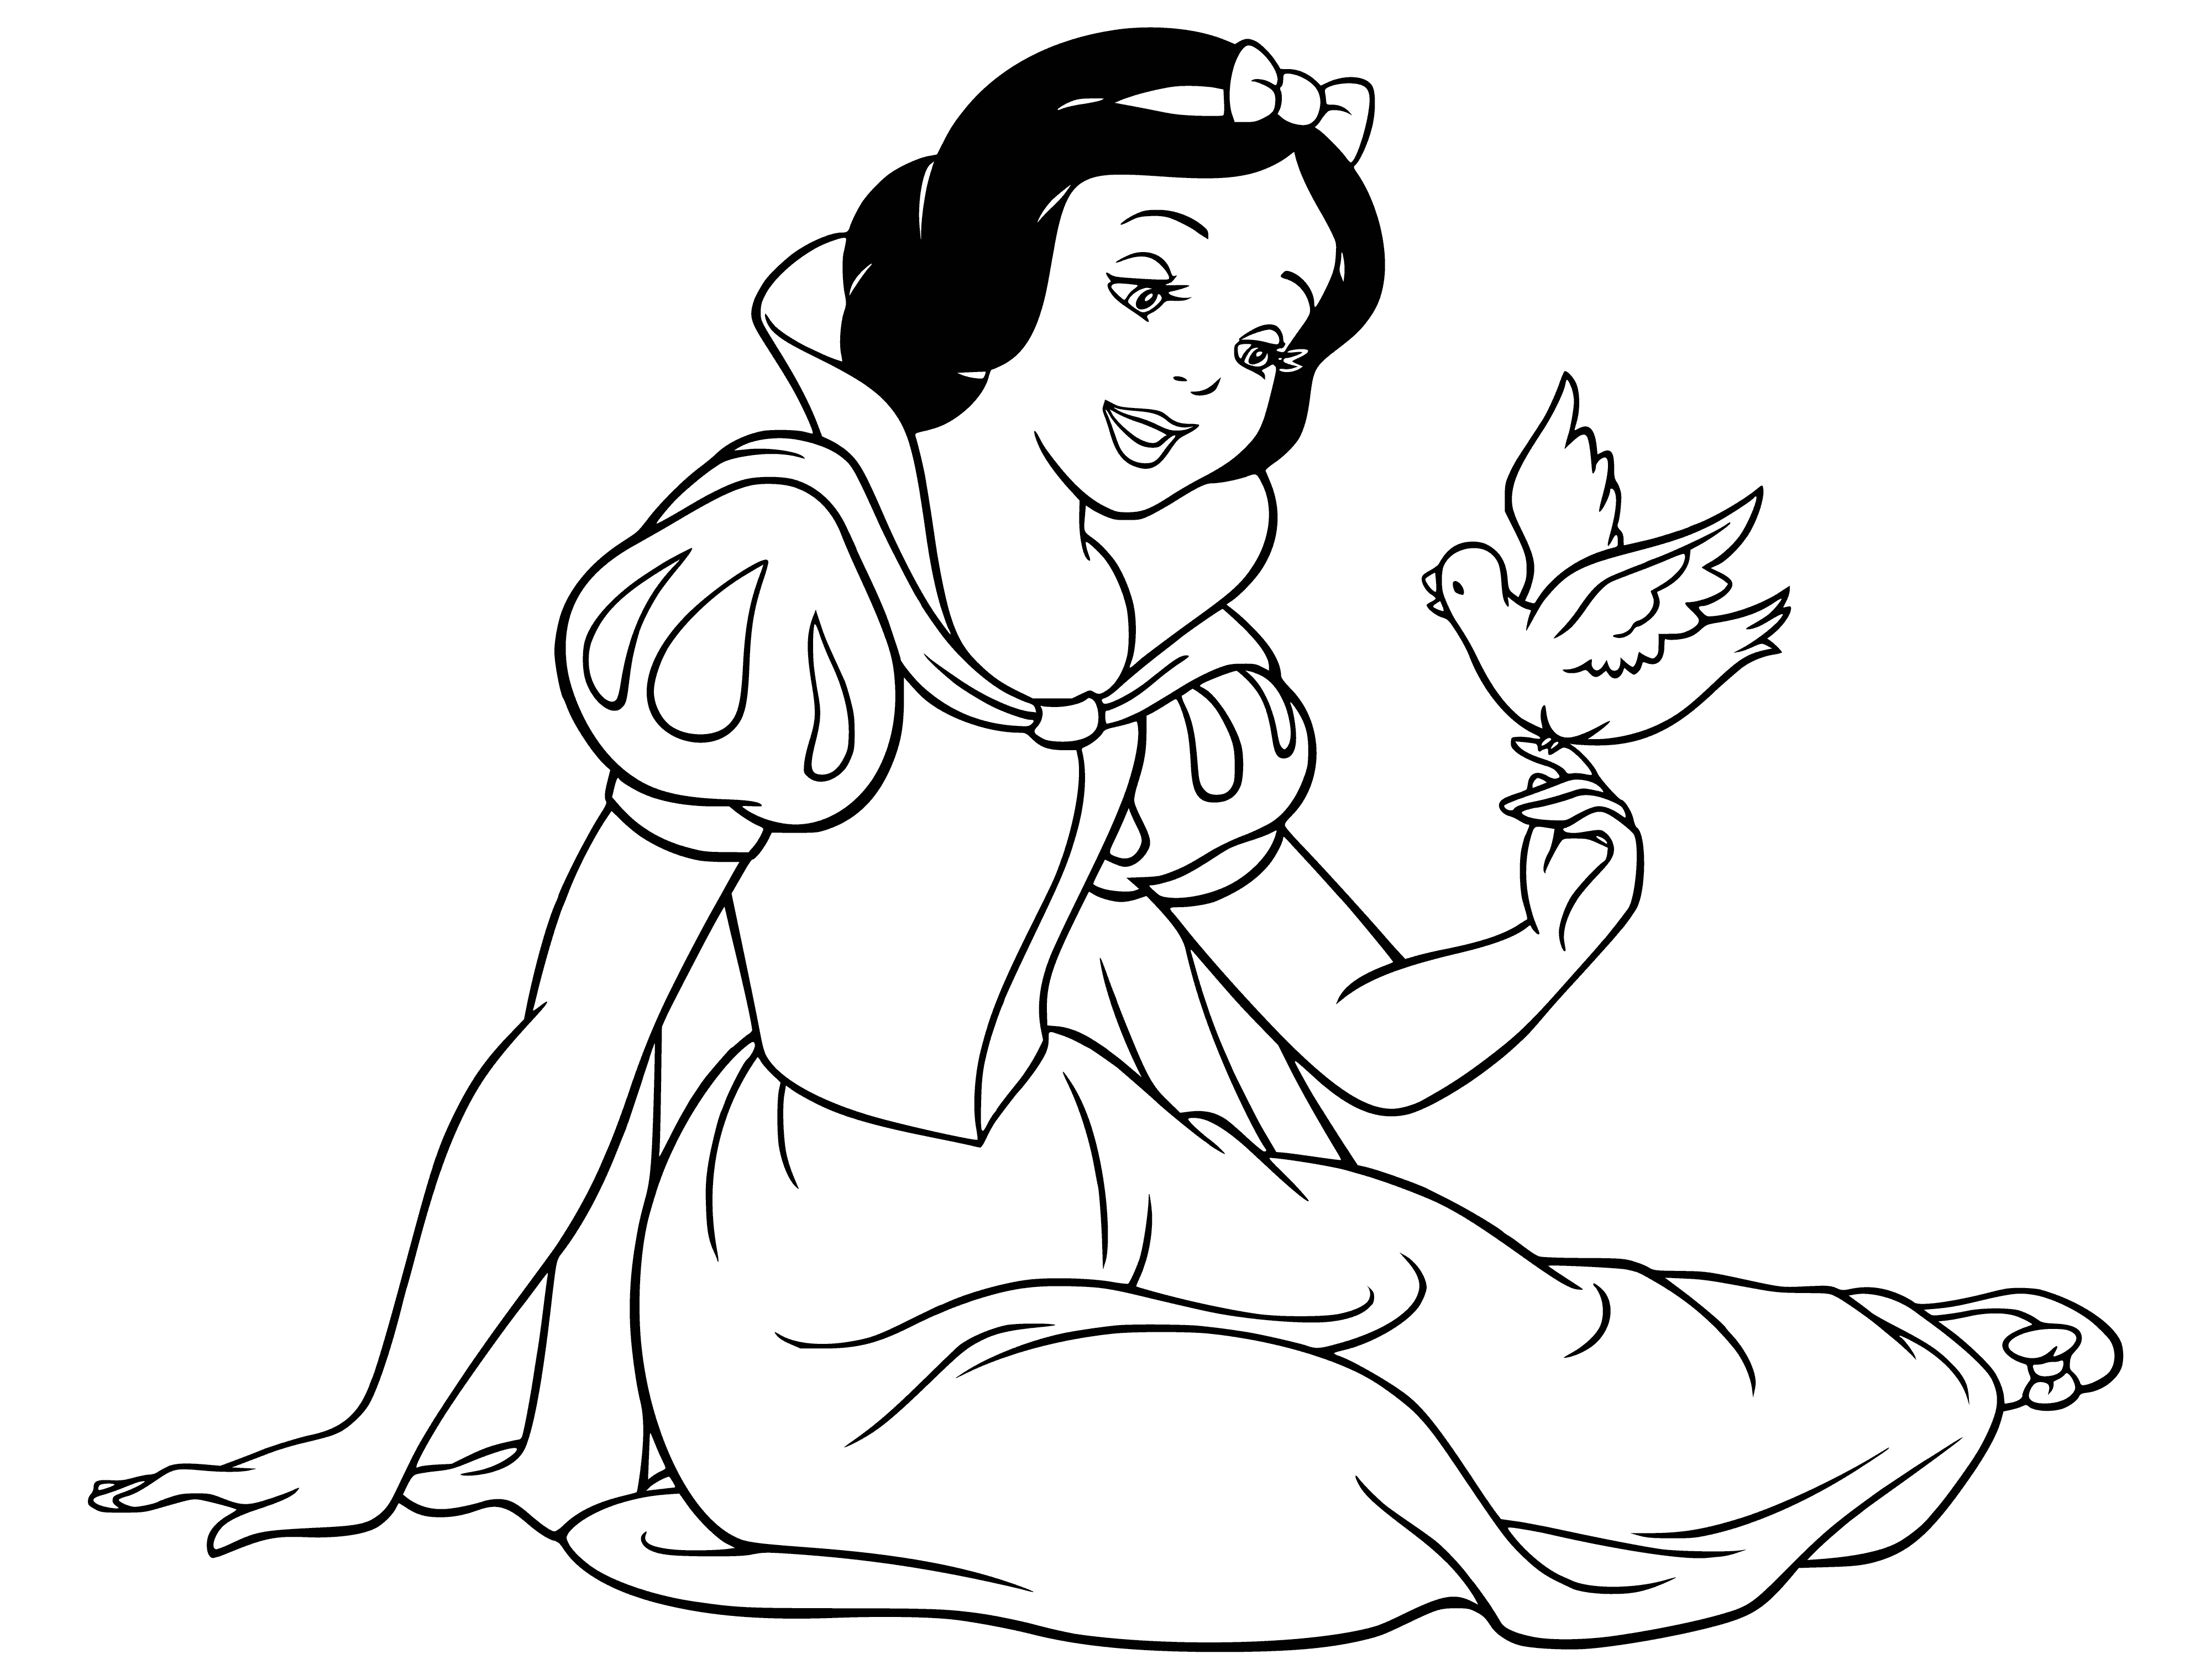 coloring page: Snow White stands sadly before a bird cage, looking at the bird within.